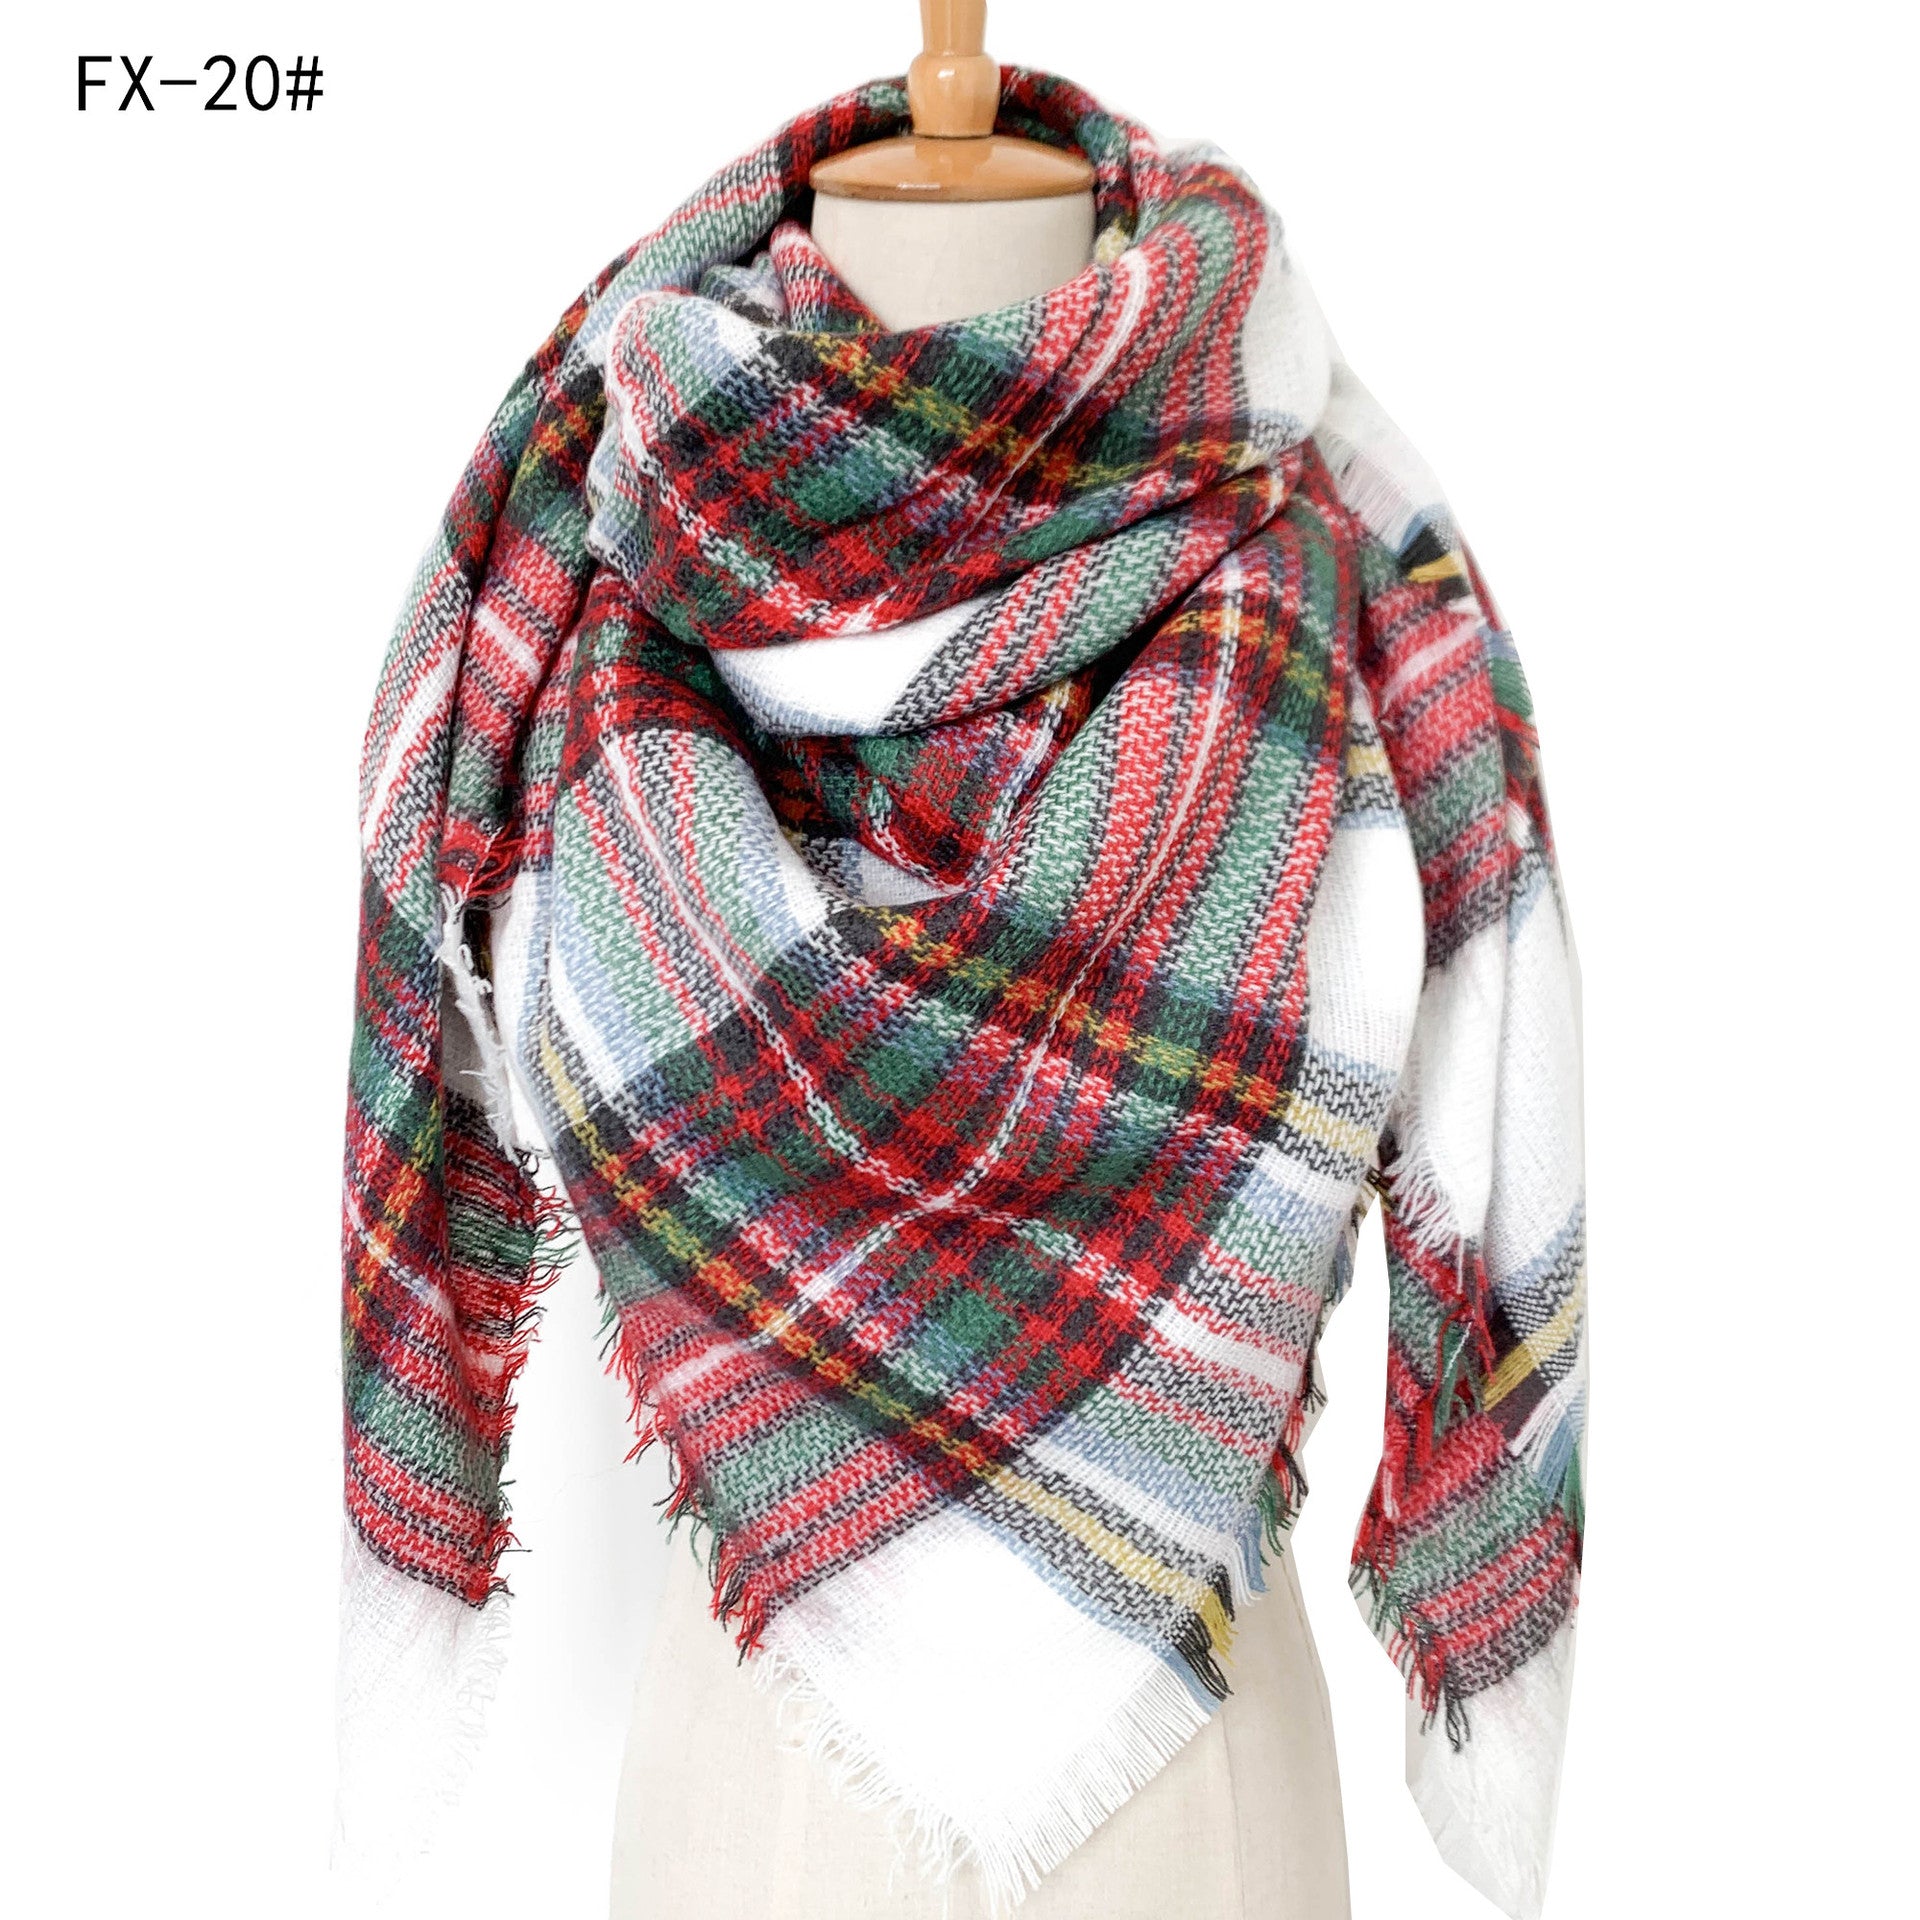 Double-Sided Colorful Plaid Scarf with Cashmere-like Feel - myETYN